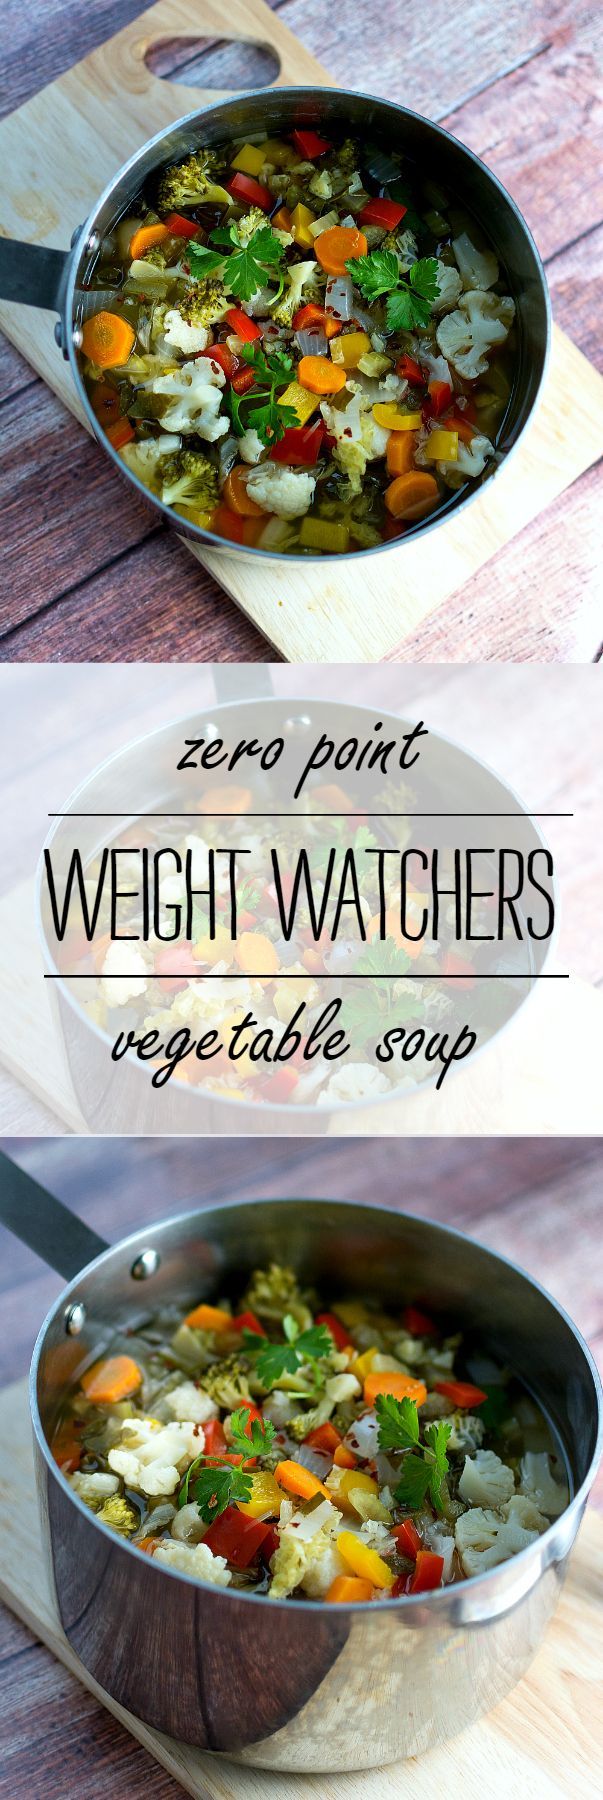 Weight Watchers Soup Recipe – Zero Point Recipe Ideas for Weight Watchers Lunch & Dinner – It All Started